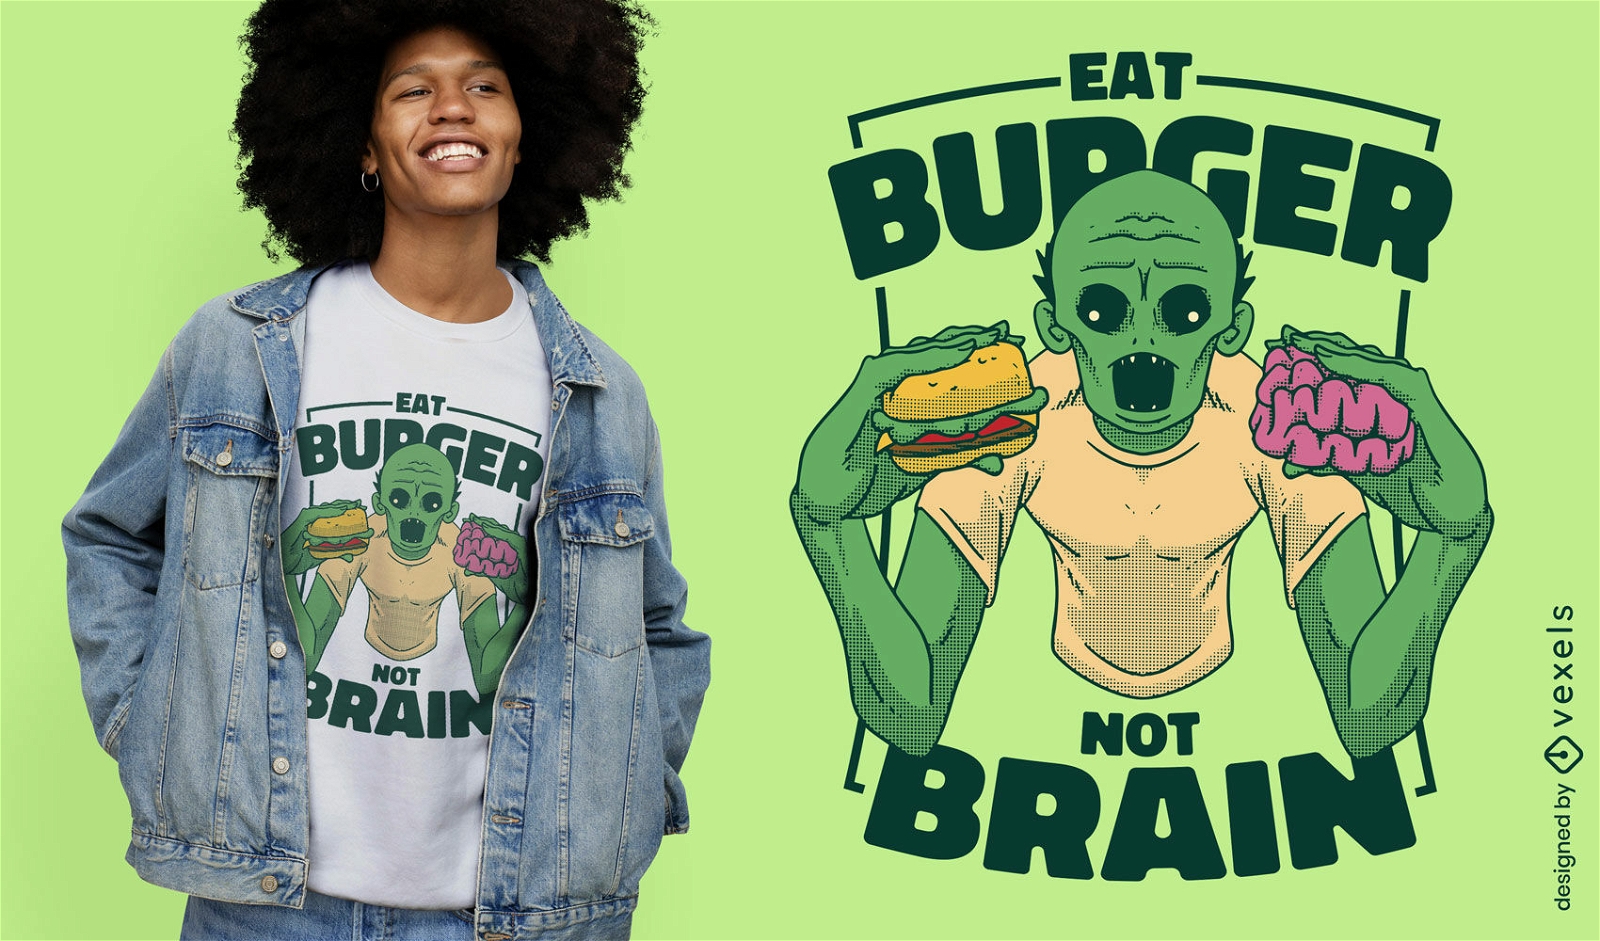 Zombie eating burger and brains t-shirt design